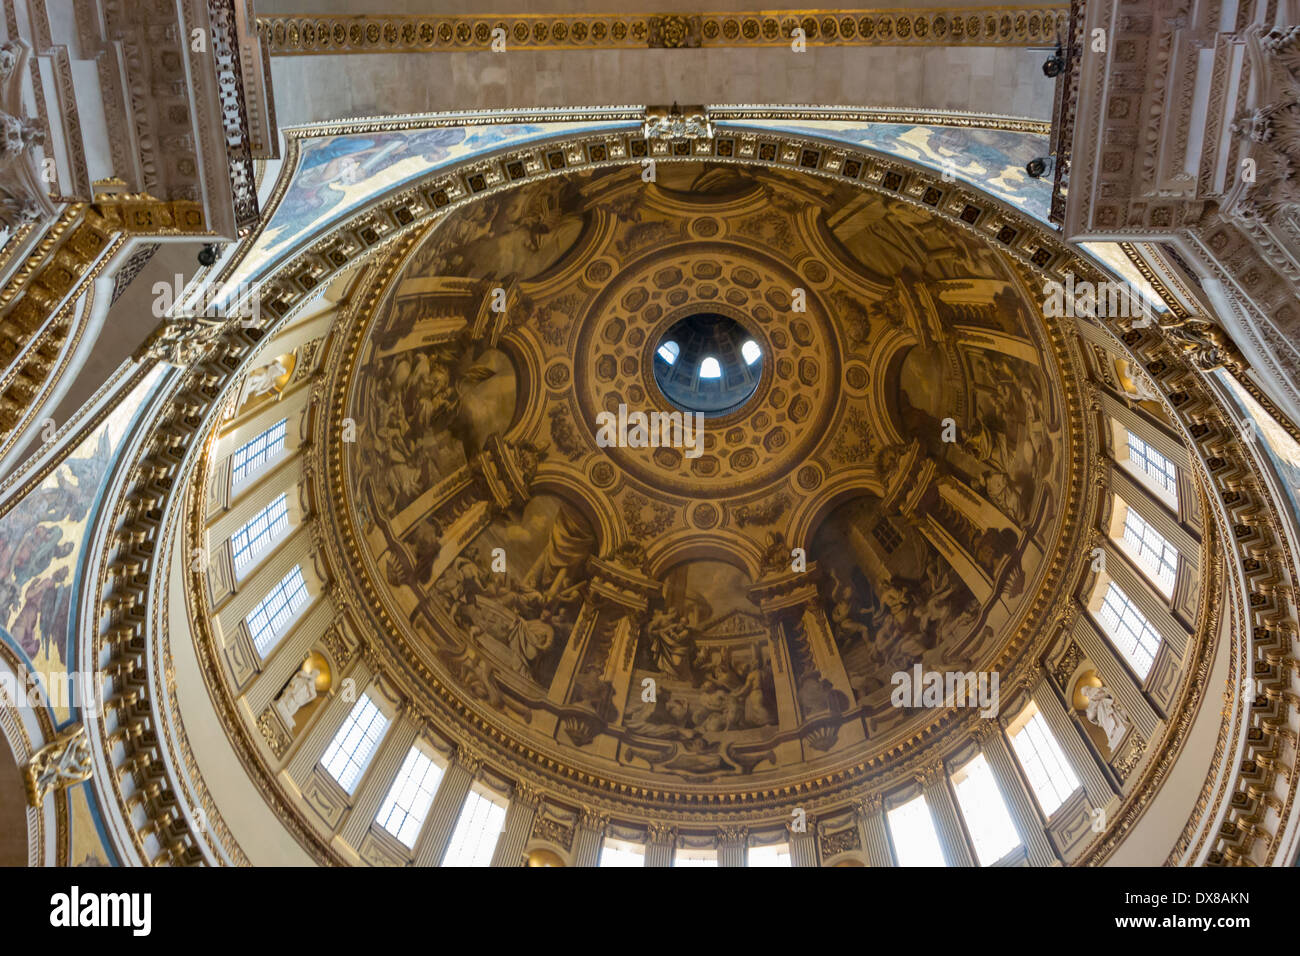 Inside The Dome Of St Paul S Cathedral London Stock Photo